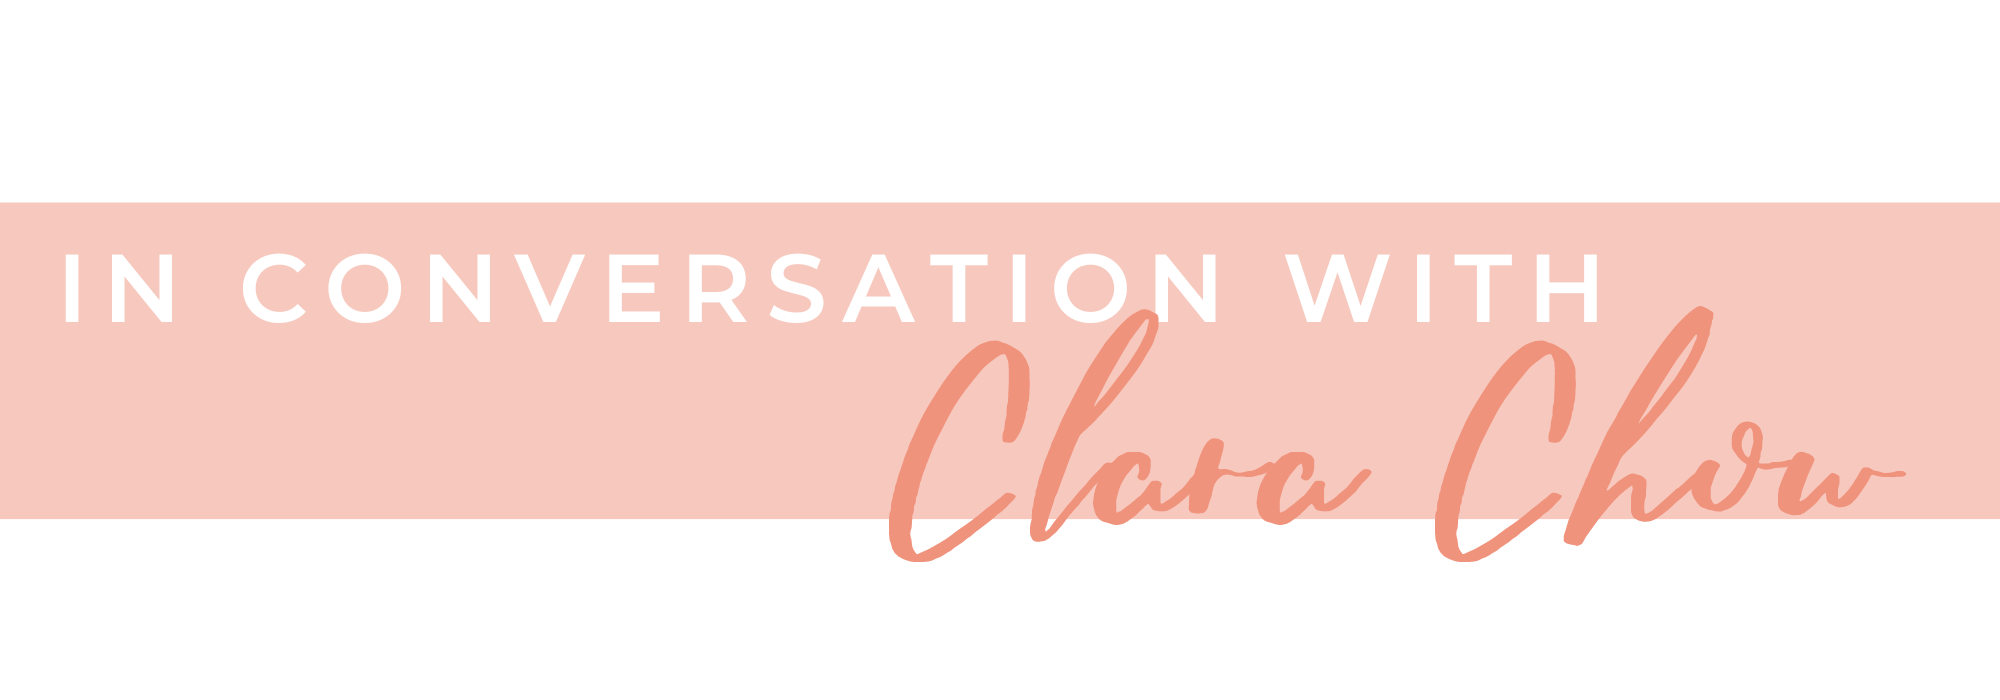 In Conversation with Clara Chow